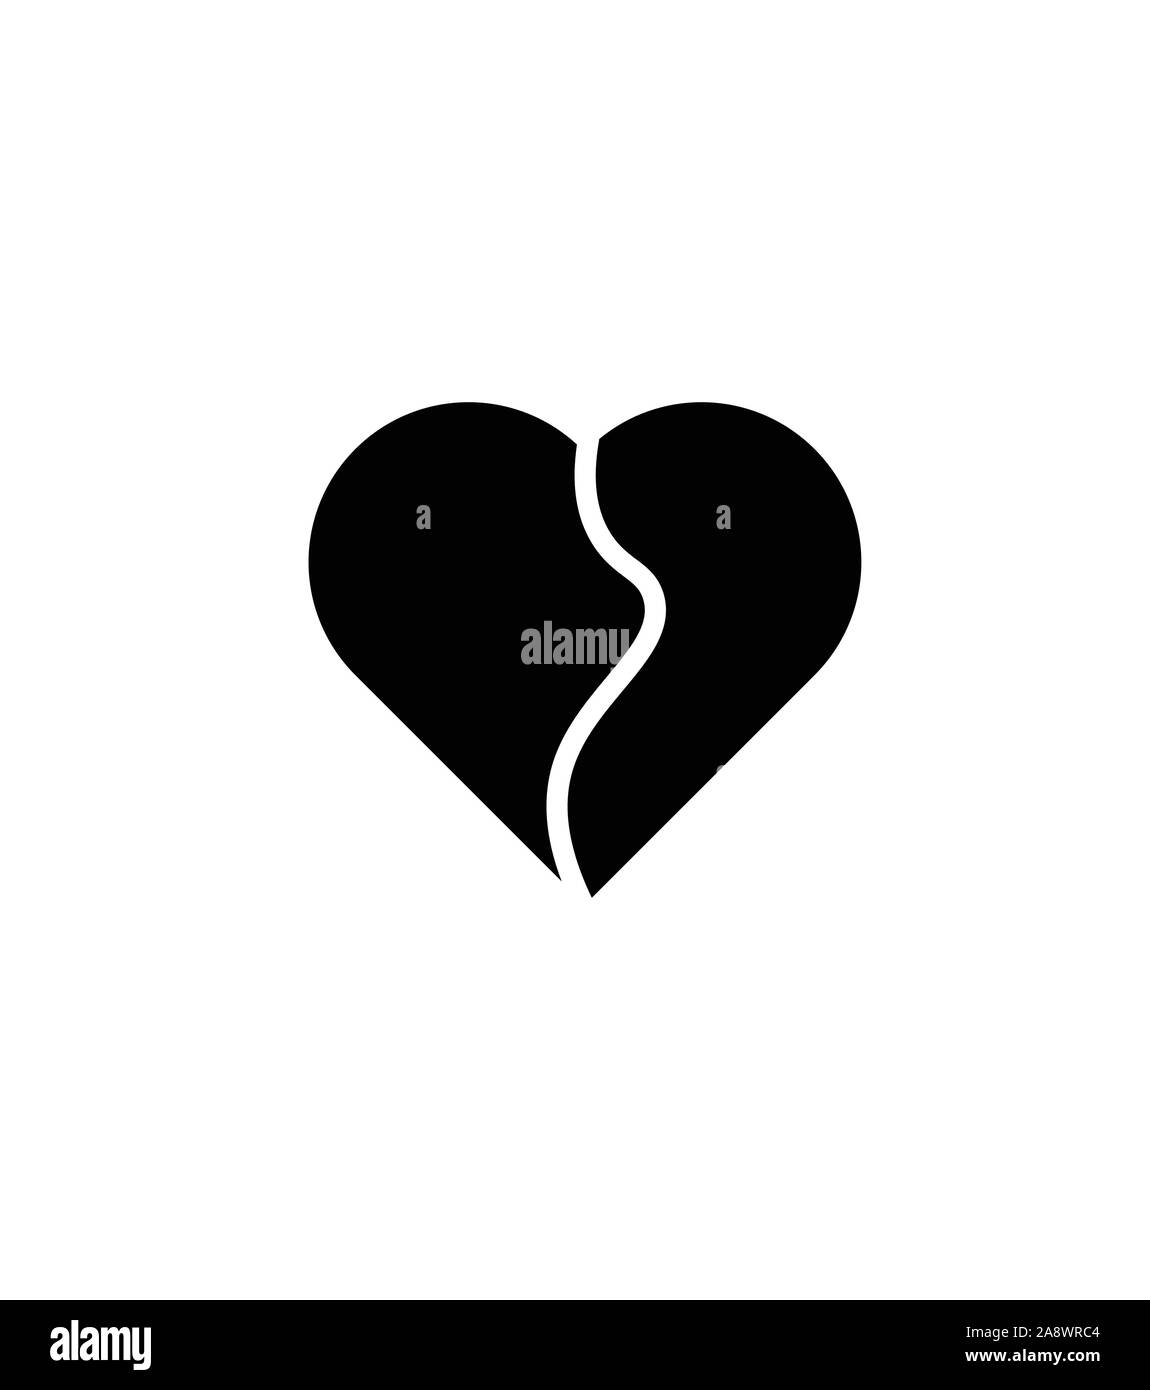 broken heart black and white drawing